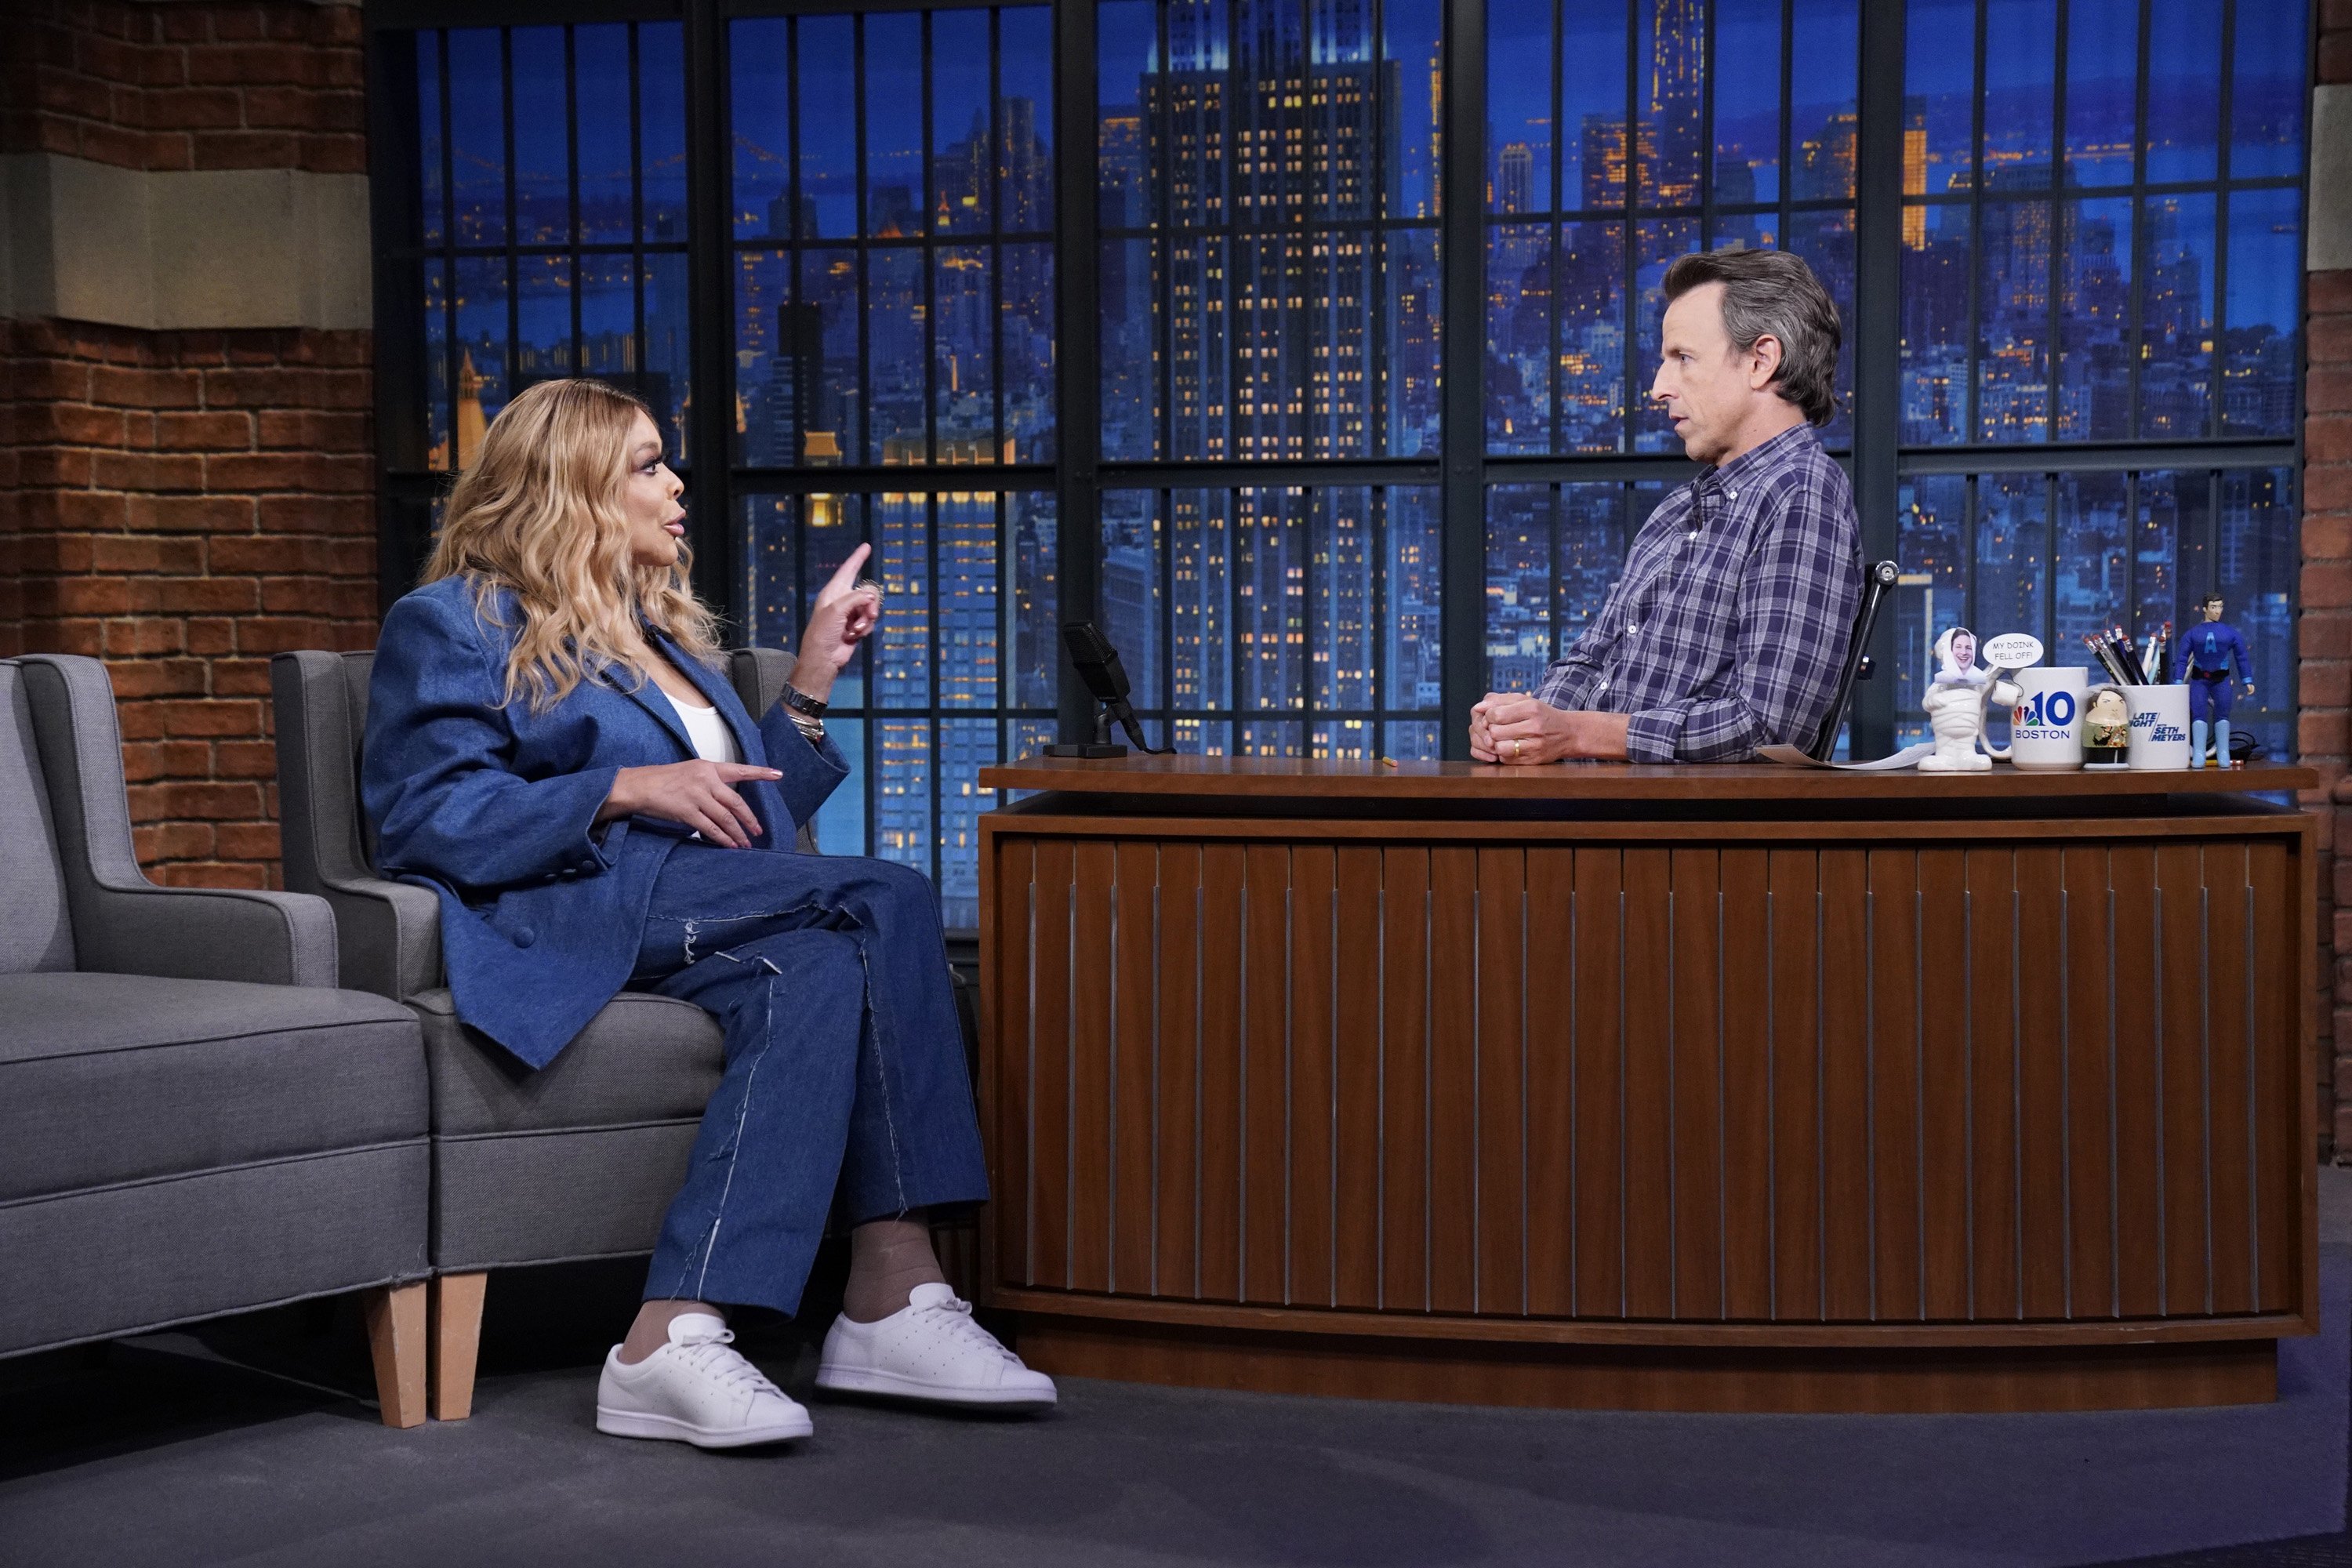 Wendy Williams during an interview with host Seth Meyers in the show "Late Night With Seth Meyers" | Source: Getty Images